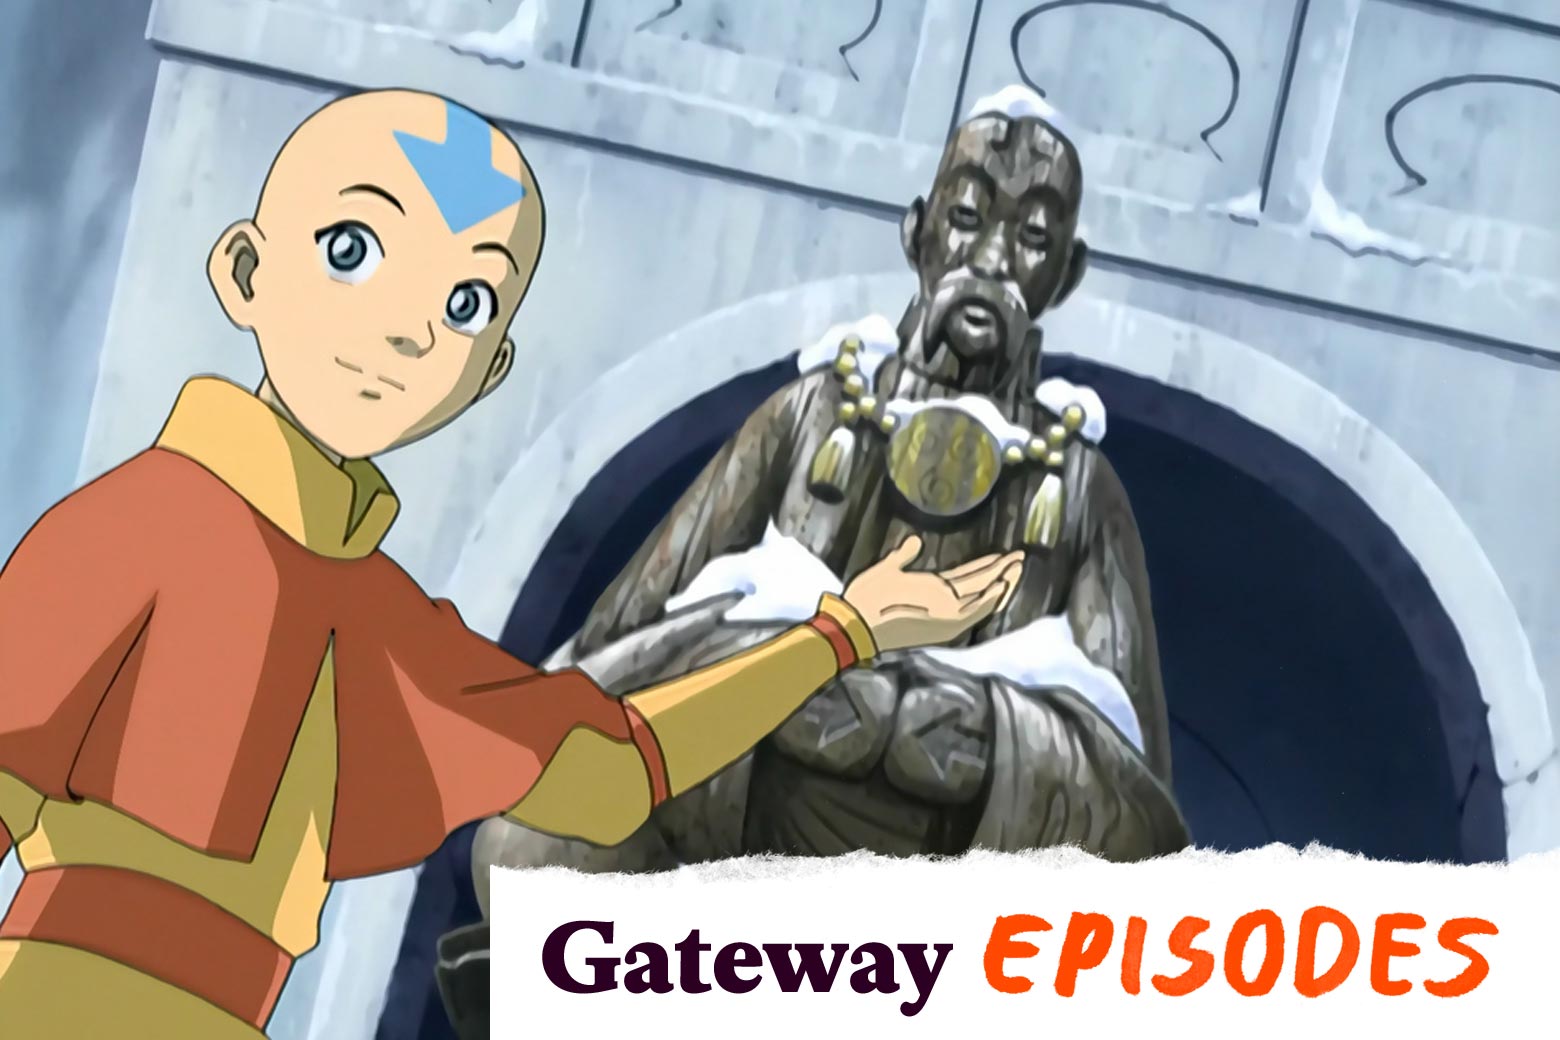 Gateway episodes: Avatar: The Last Airbender's “The Southern Air Temple.”